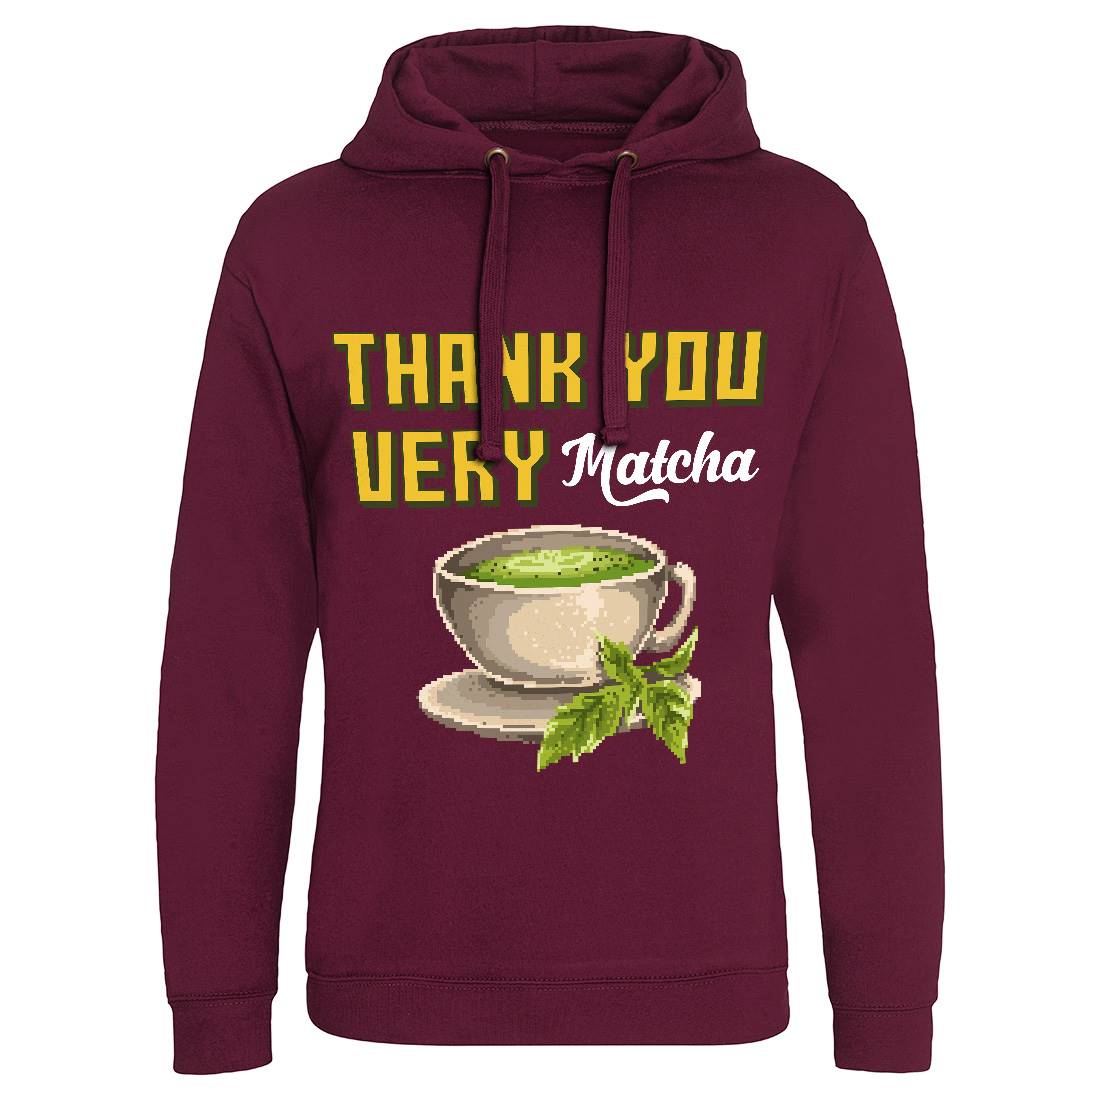 Thank You Very Matcha Mens Hoodie Without Pocket Drinks B965